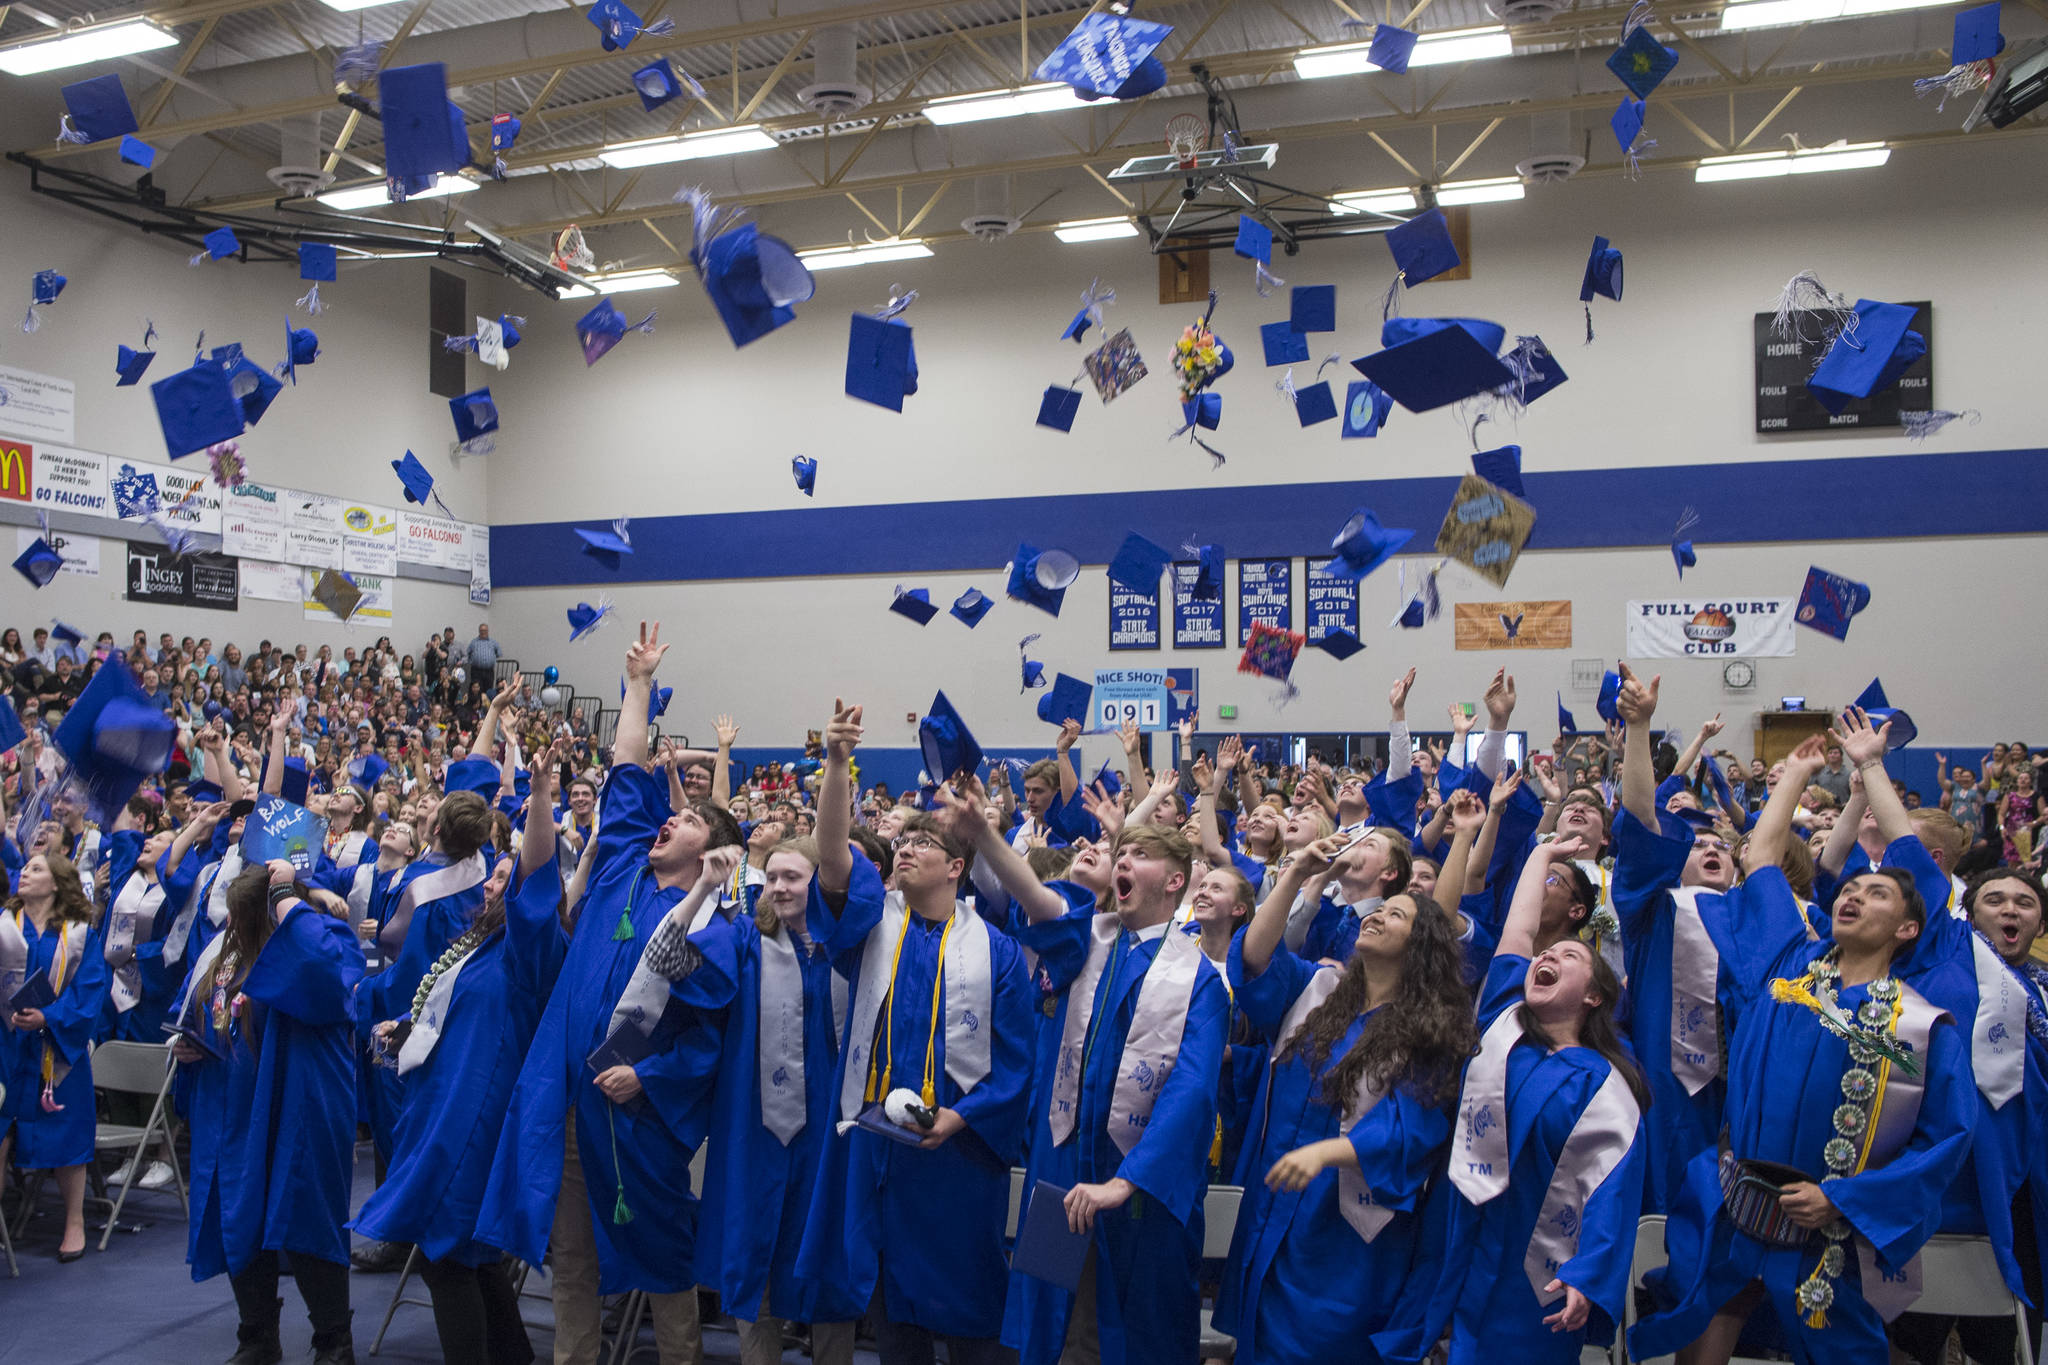 Thunder Mountain High School seniors celebrate their graduation on Sunday, May 26, 2019. The class of 2020 was forced to skip graduation ceremonies due to COVID-19 restrictions. Discussions are underway to allow the class of 2021 an opportunity to participate in commencement in accordance with CBJ’s mitigation strategies. (Michael Penn / Juneau Empire File)